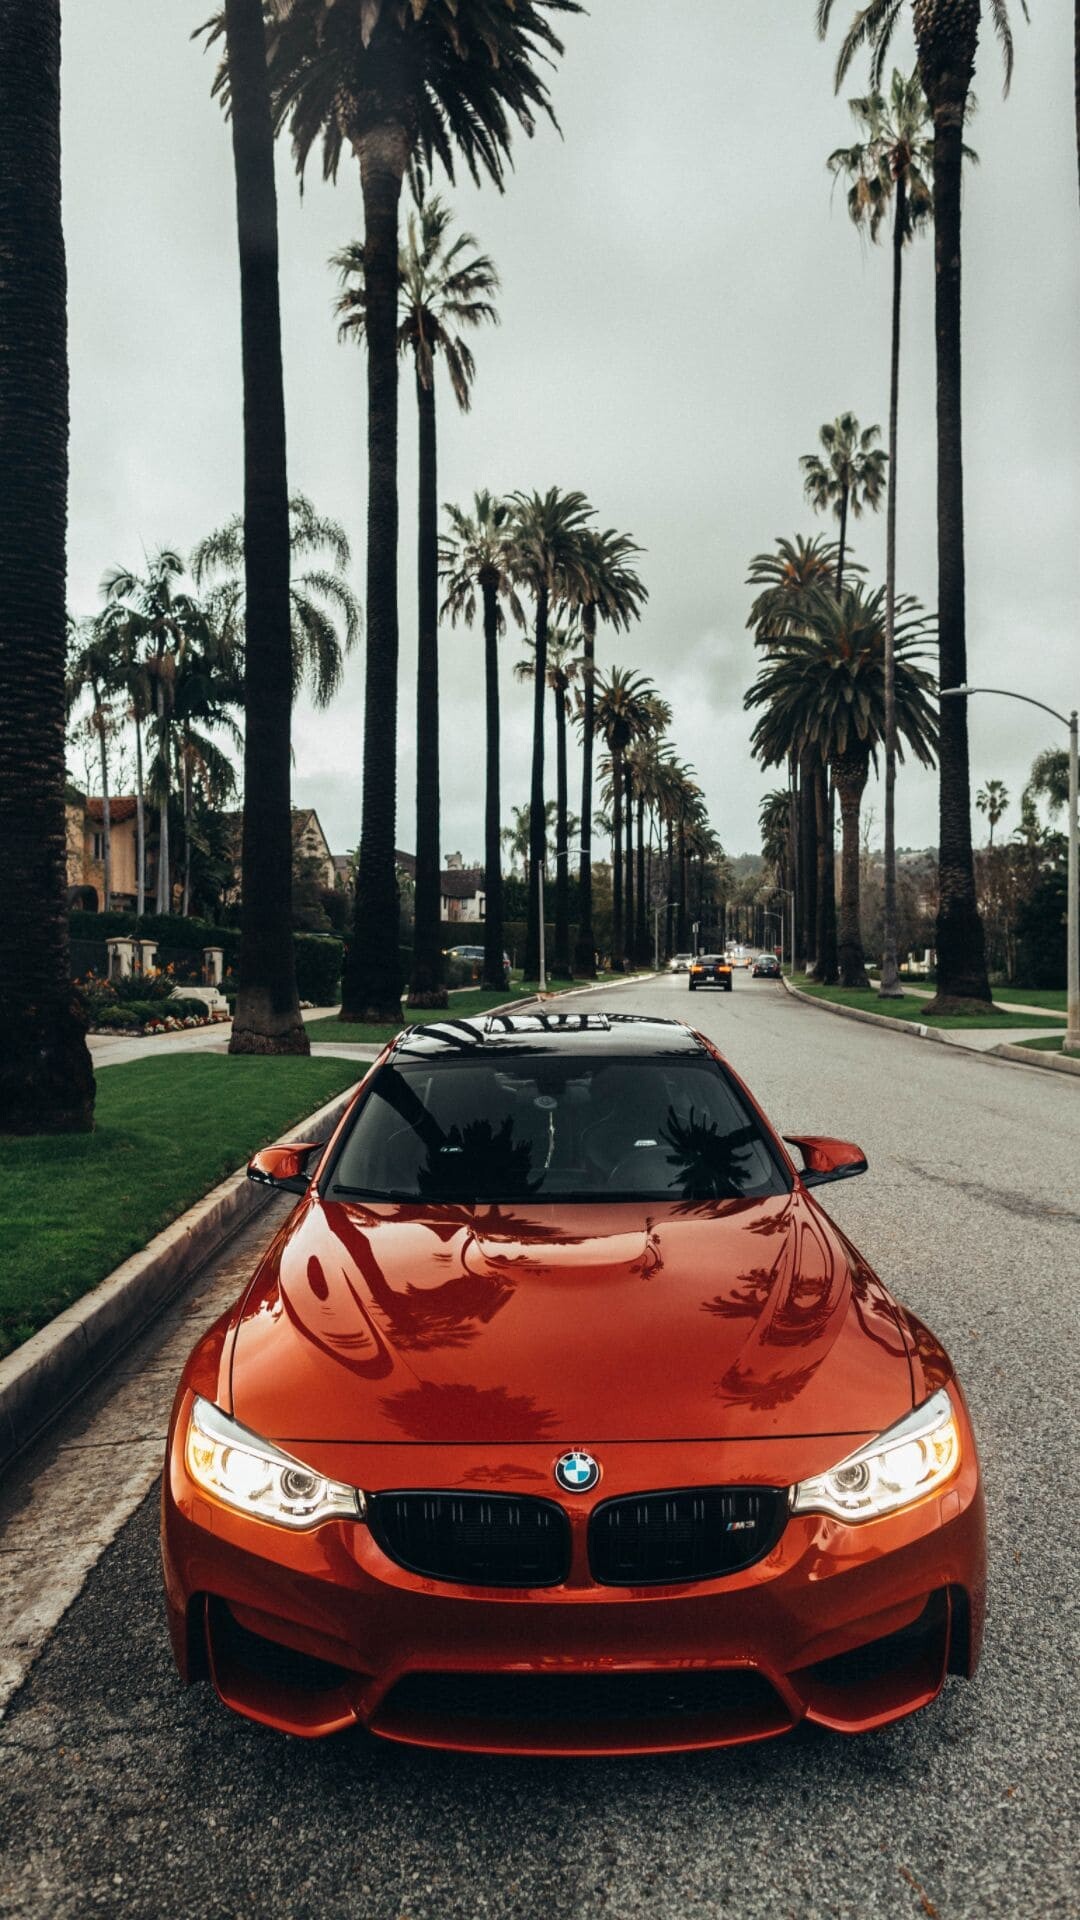 BMW 2 Series: The part of the "German Big 3" luxury automakers, Coupe. 1080x1920 Full HD Wallpaper.